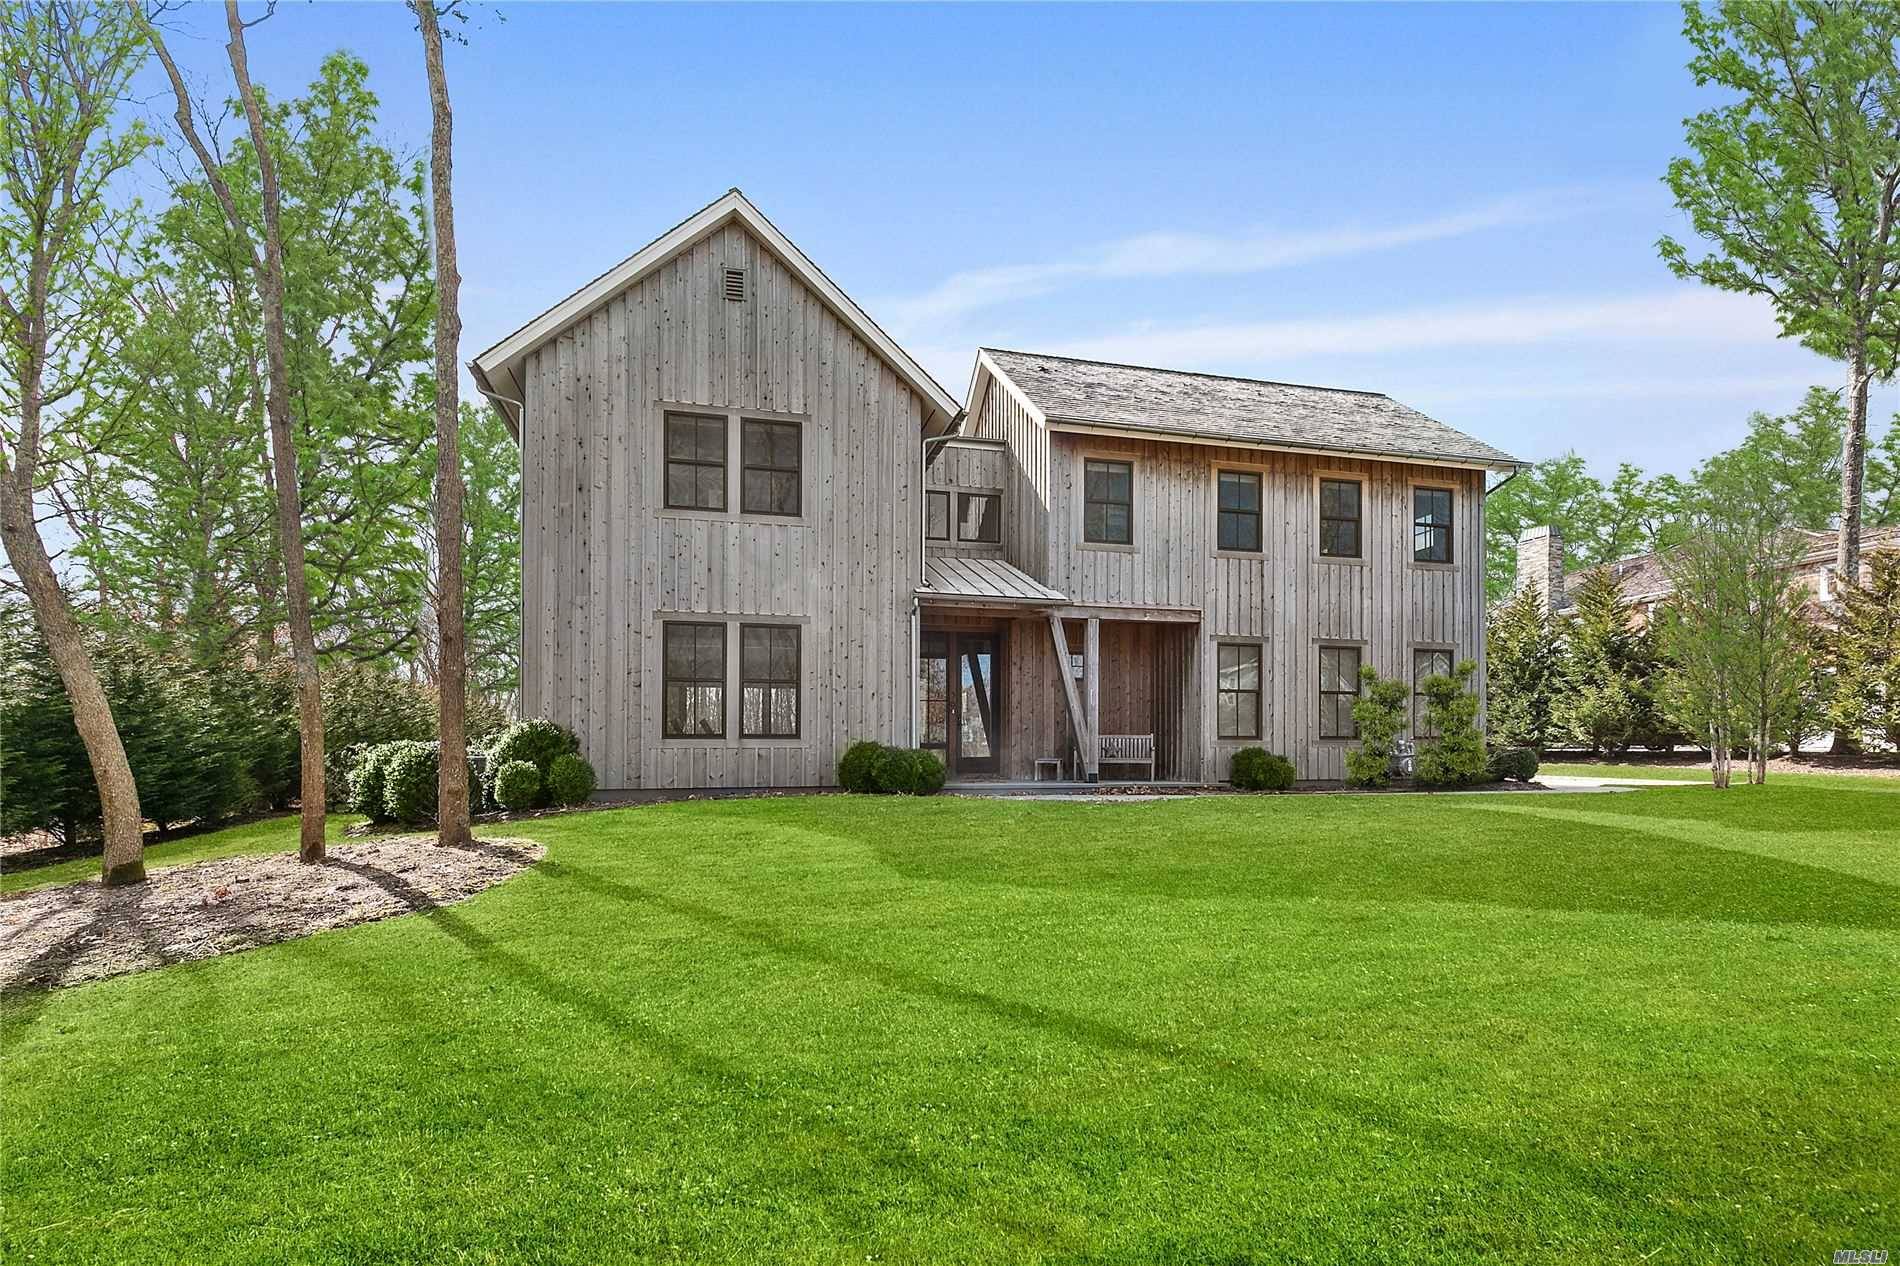 Offered for the first time for rent since its completion in 2017, this 'Mecox Barn' style 6 Bedroom home nestled on a quiet stretch of Bridgehampton's acclaimed Barn amp ; ...